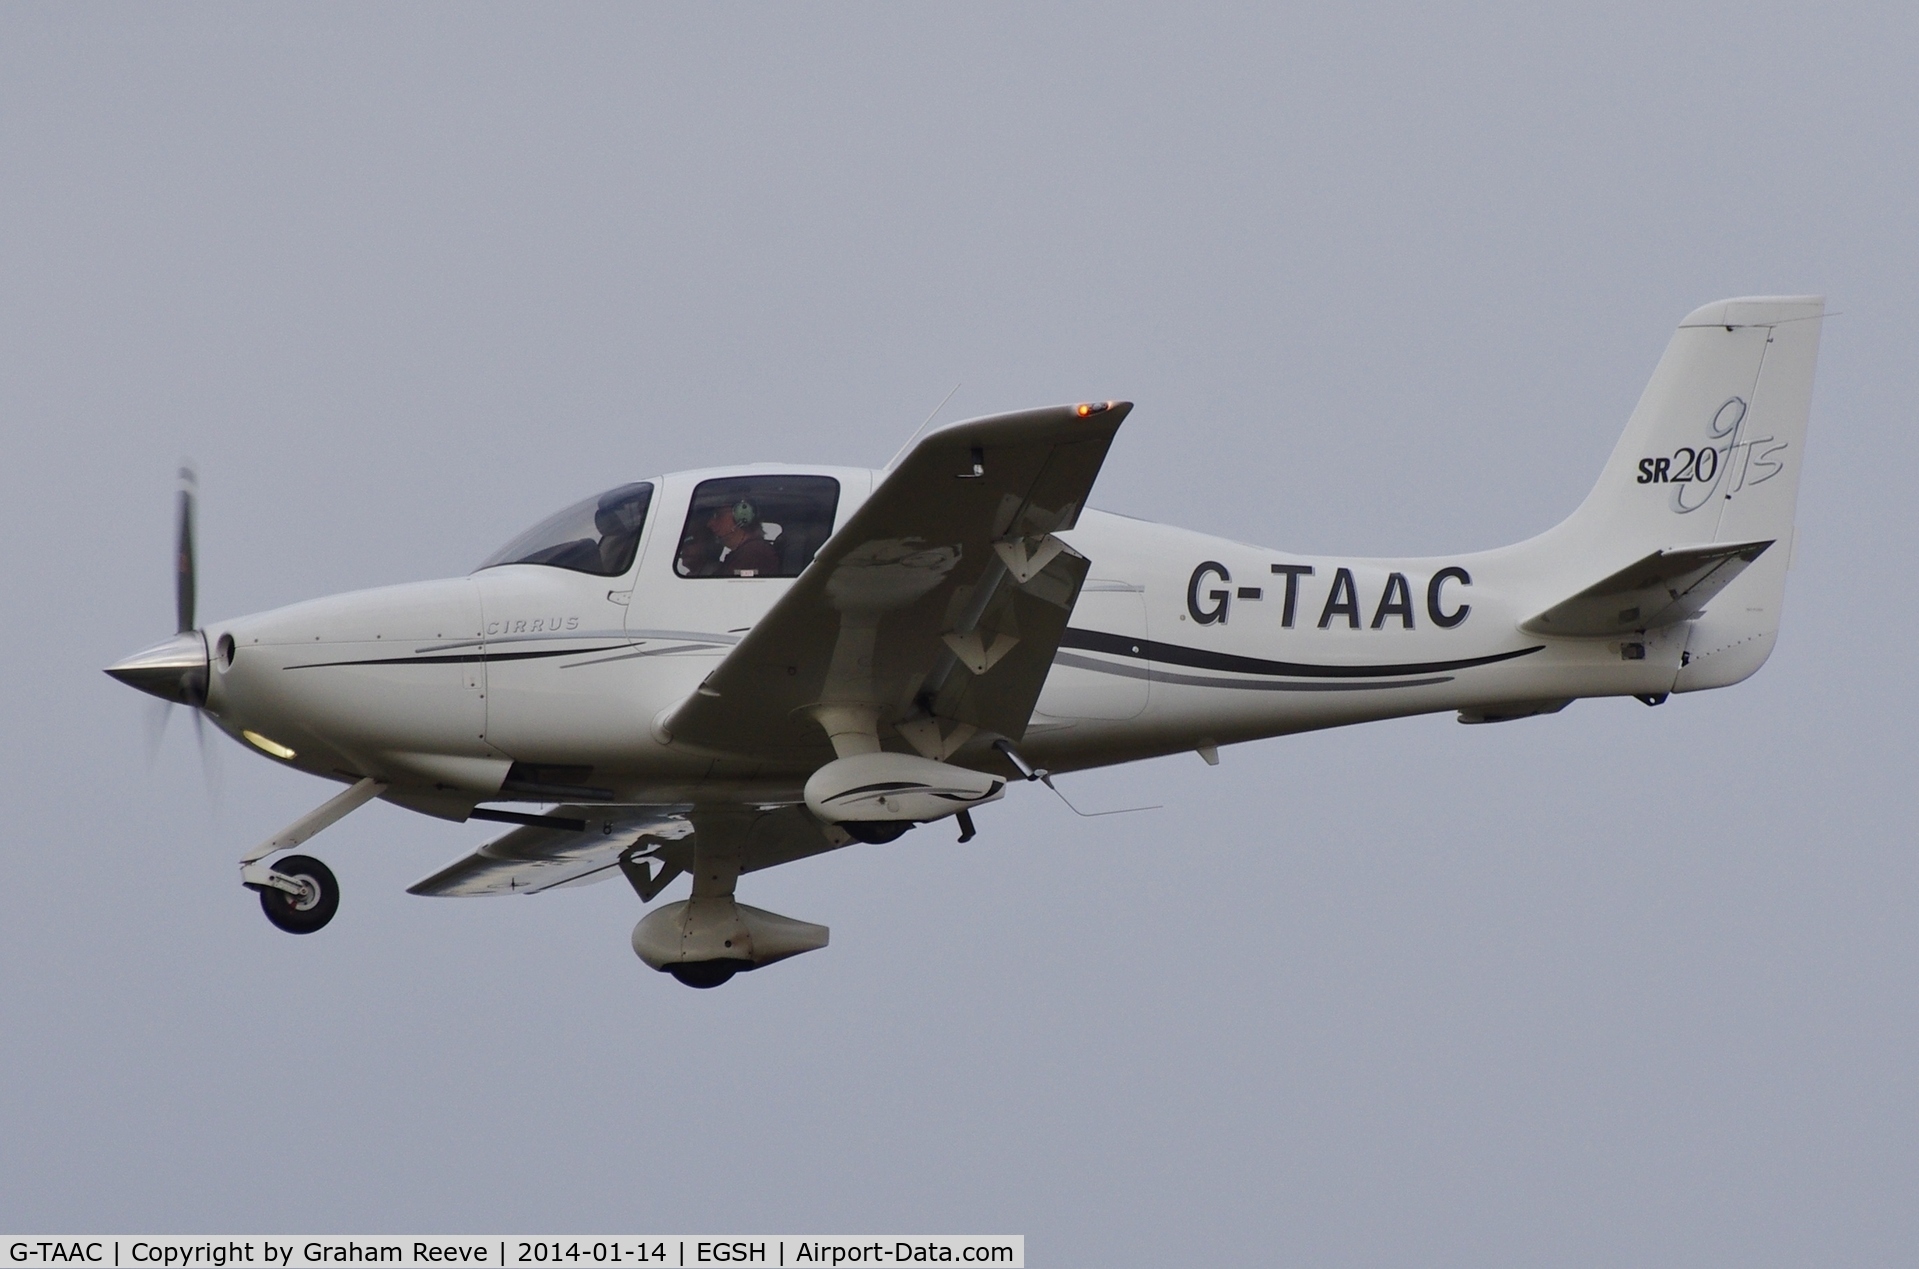 G-TAAC, 2006 Cirrus SR20 GTS C/N 1694, About to land on runway 27.